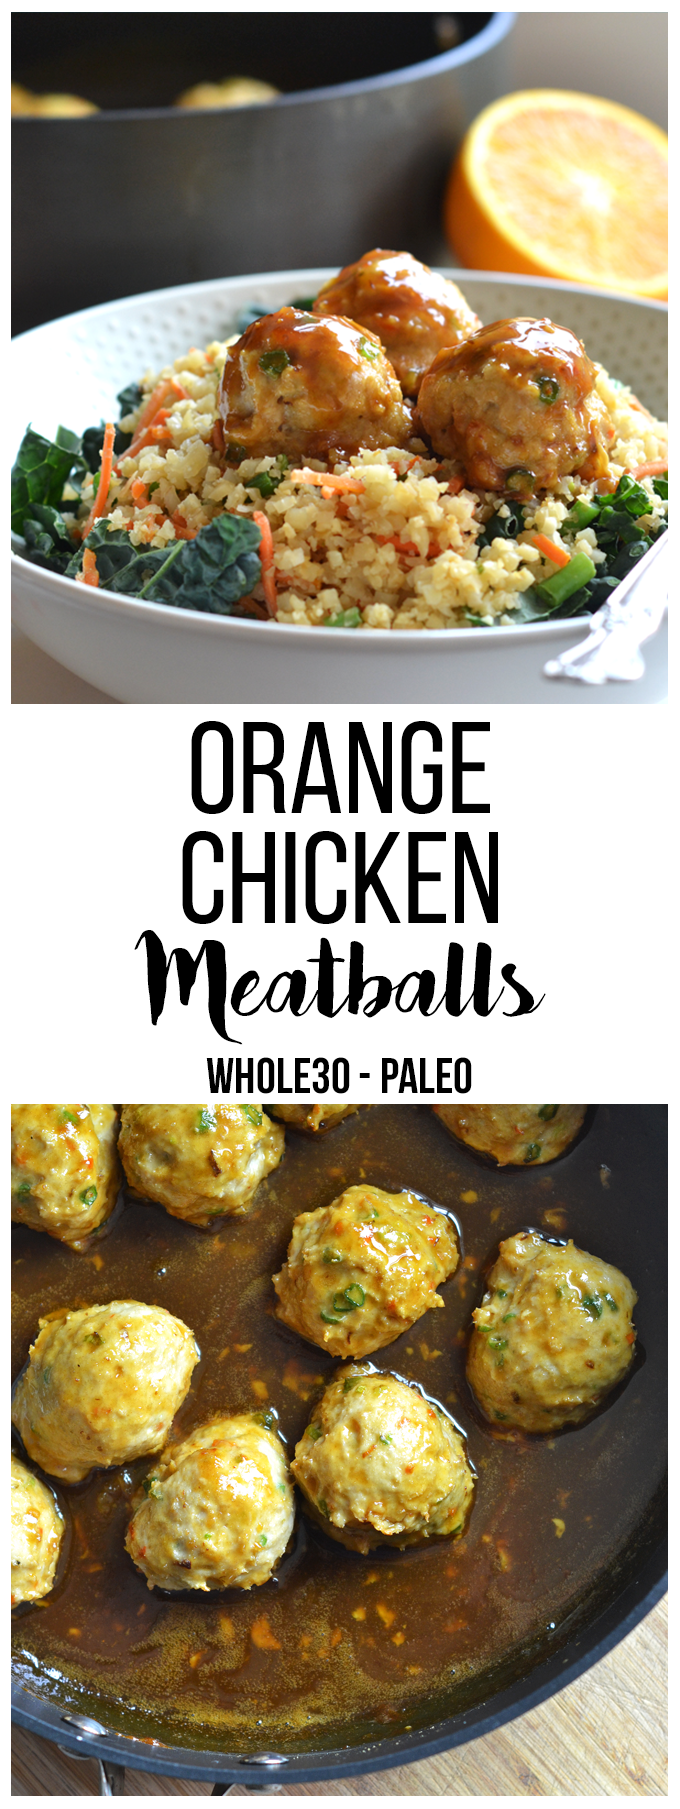 These Orange Chicken Meatballs are perfect for a quick weeknight meal on top of cauliflower fried rice!